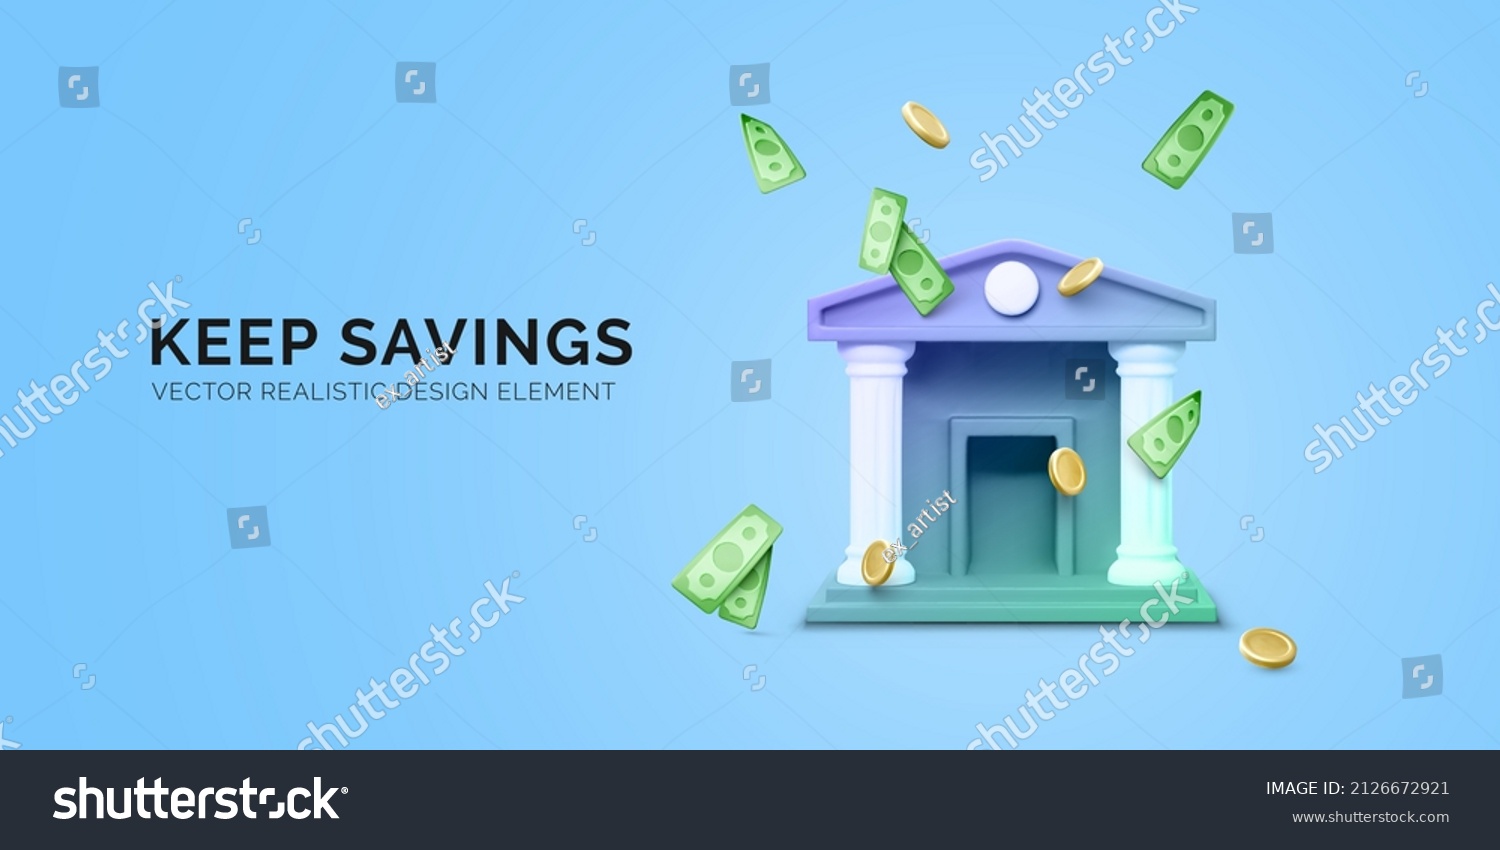 3d bank building and falling coins and paper currency. 3d realistic bank icon. Money transaction or savings concept. Vector illustration #2126672921